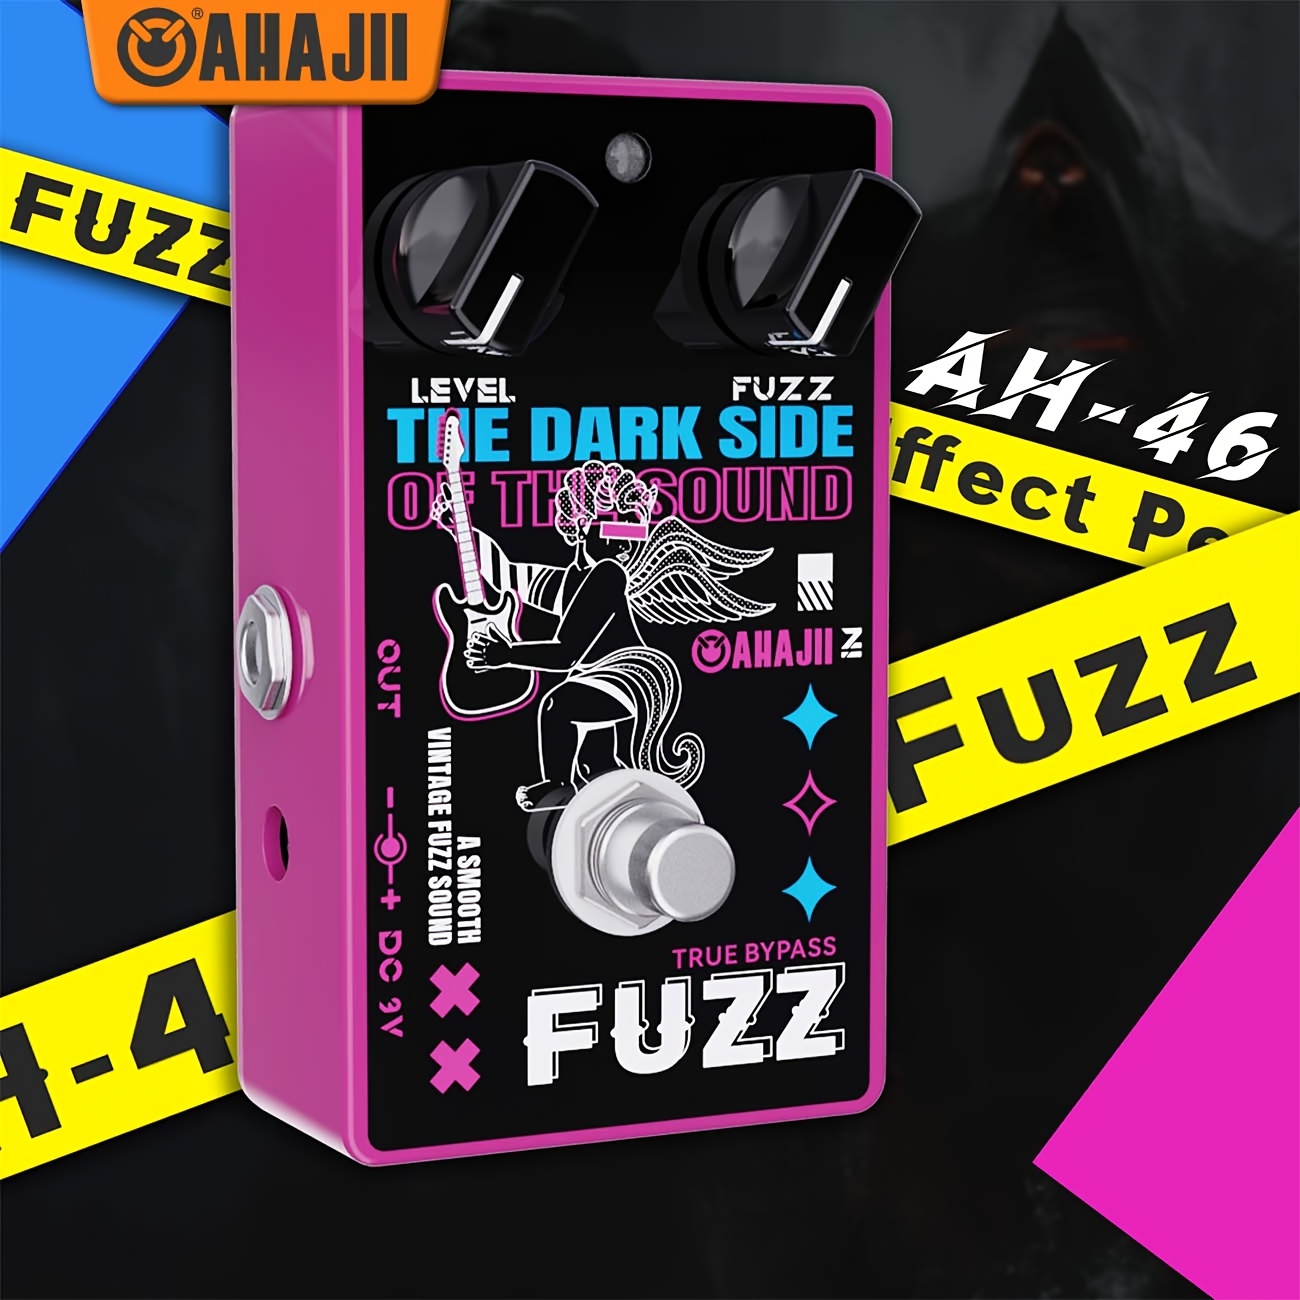 

Ah46 Fuzz Guitar Pedal Aluminum Alloy With True Bypass Design Guitar Pedal Parts & Accessories High Quality